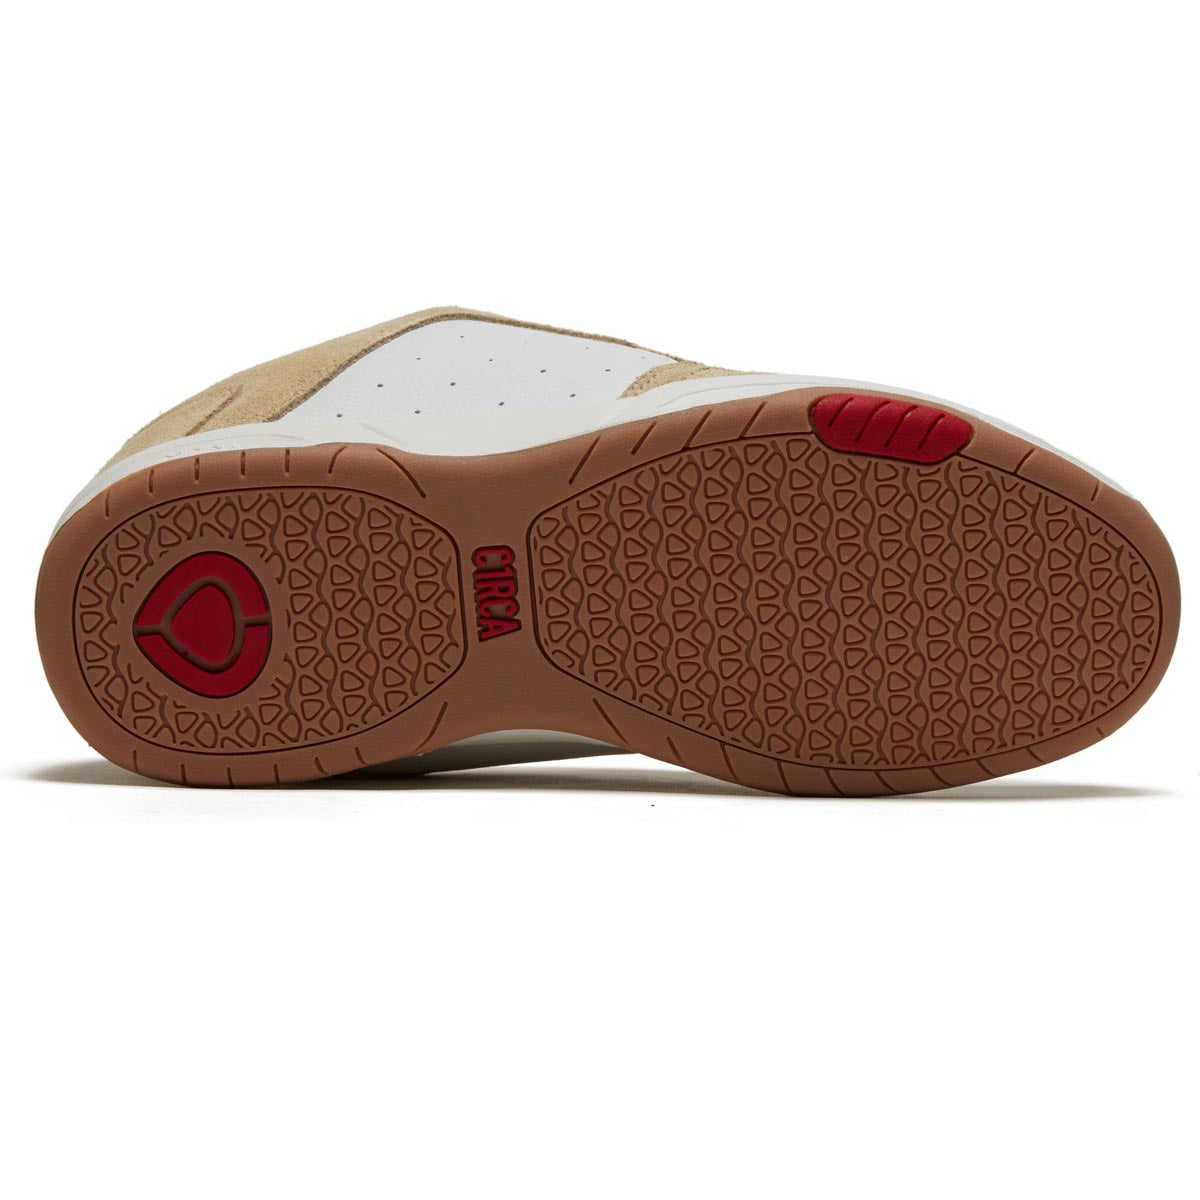 C1rca 805 Shoes - Navajo/White/Red image 4